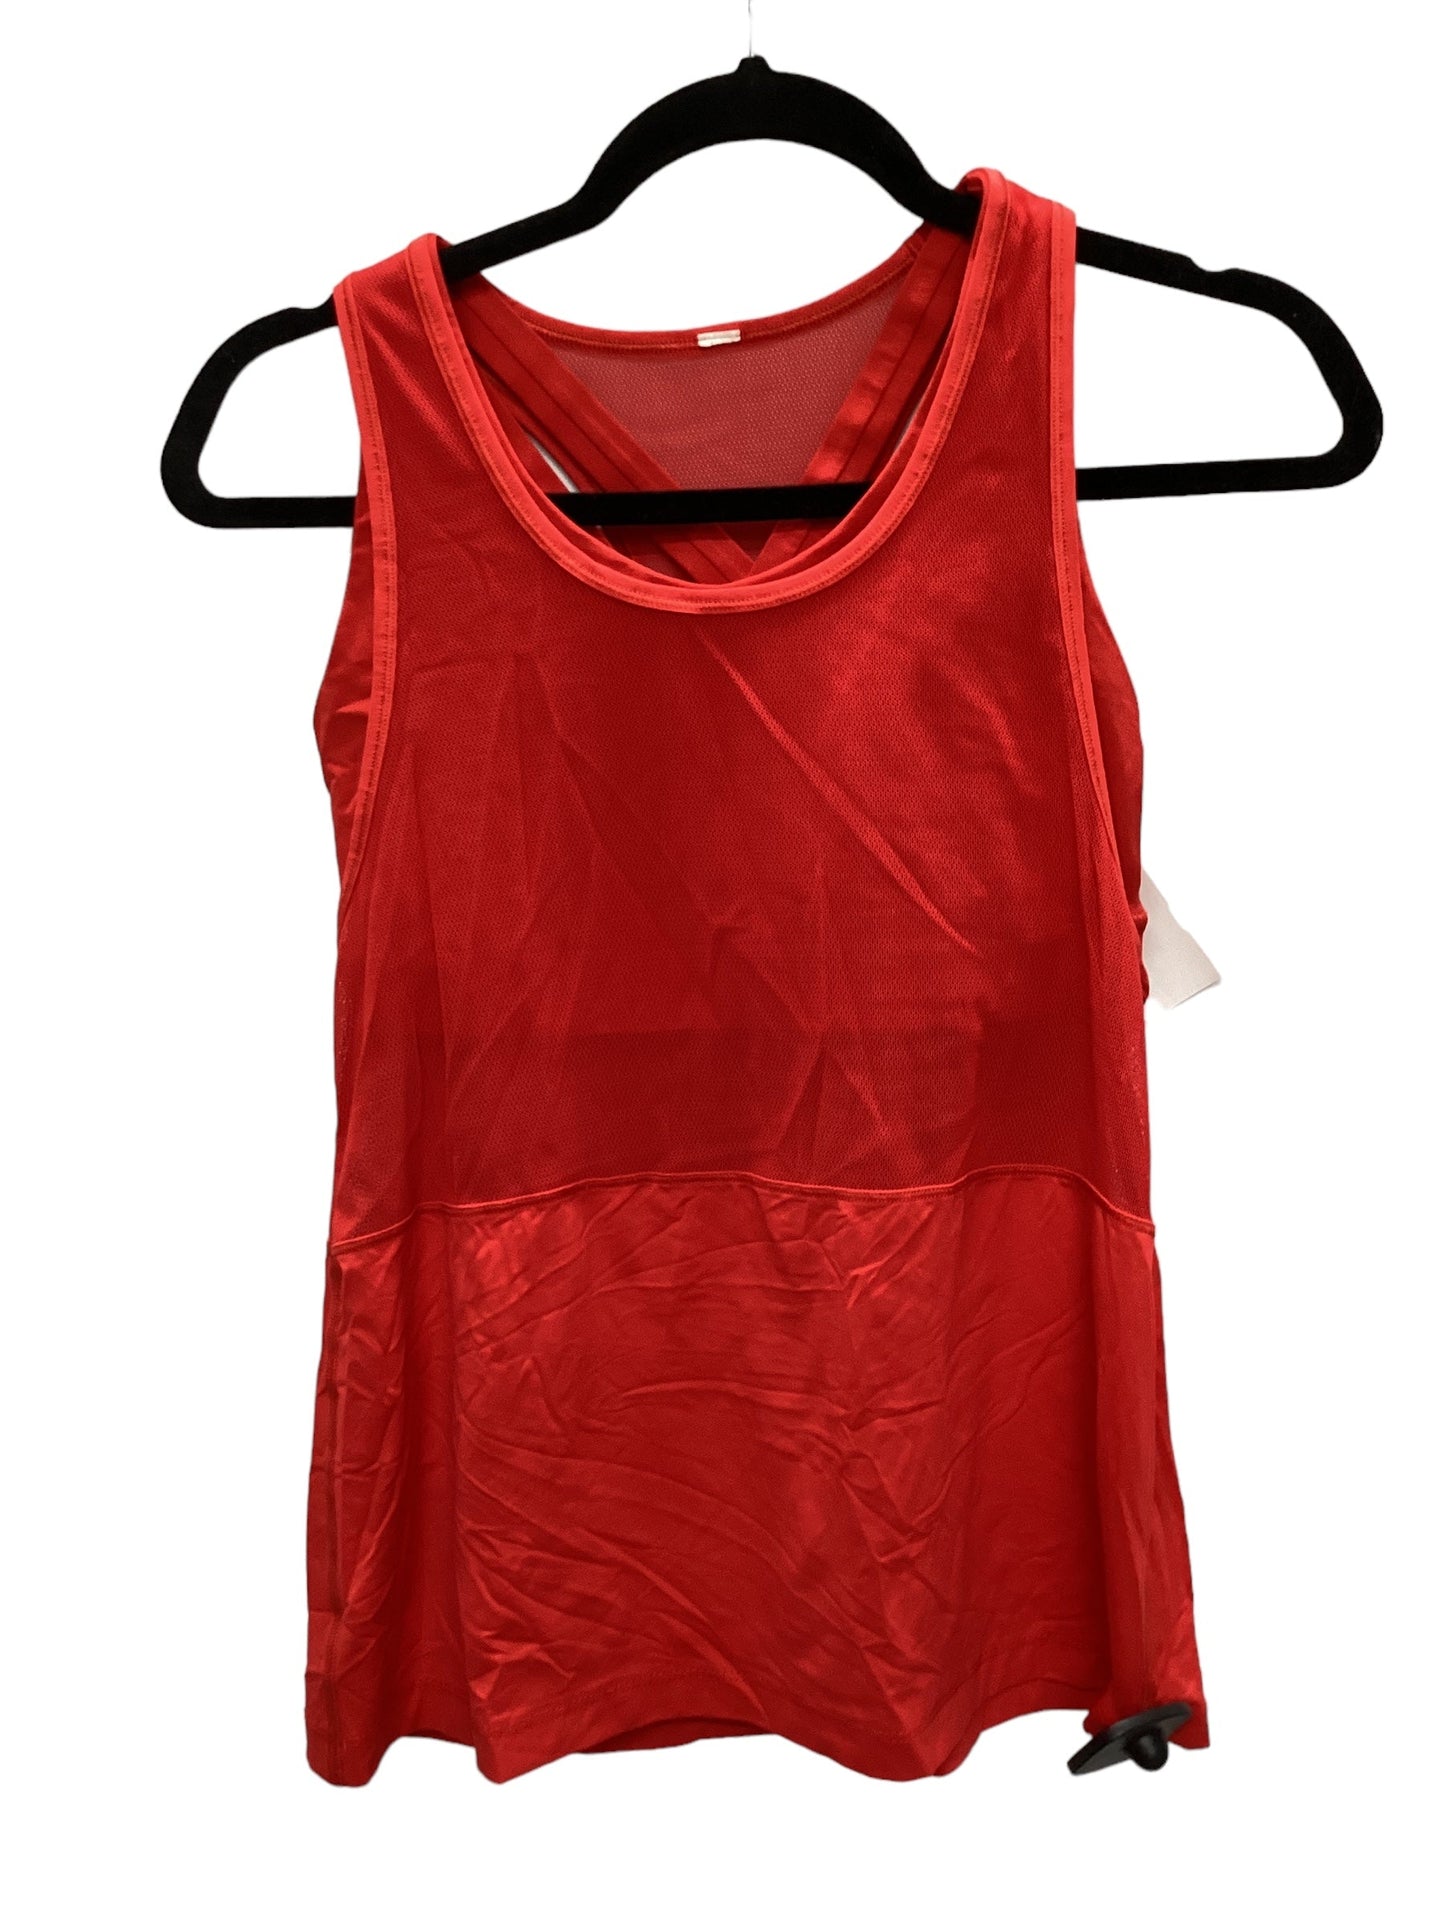 Red Athletic Tank Top Lululemon, Size 8